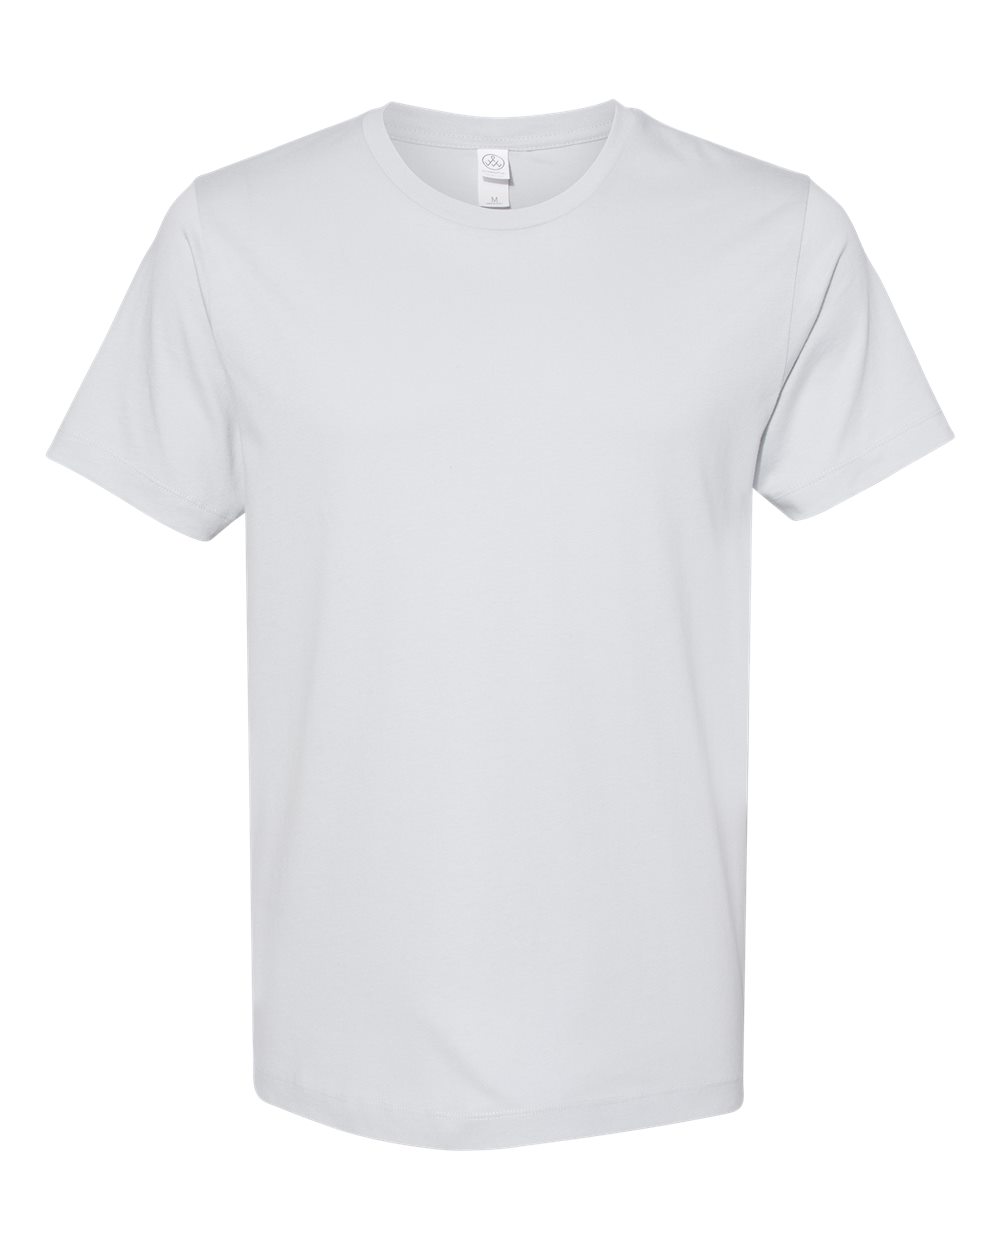 mens tshirts Cotton Jersey Go-To Tee